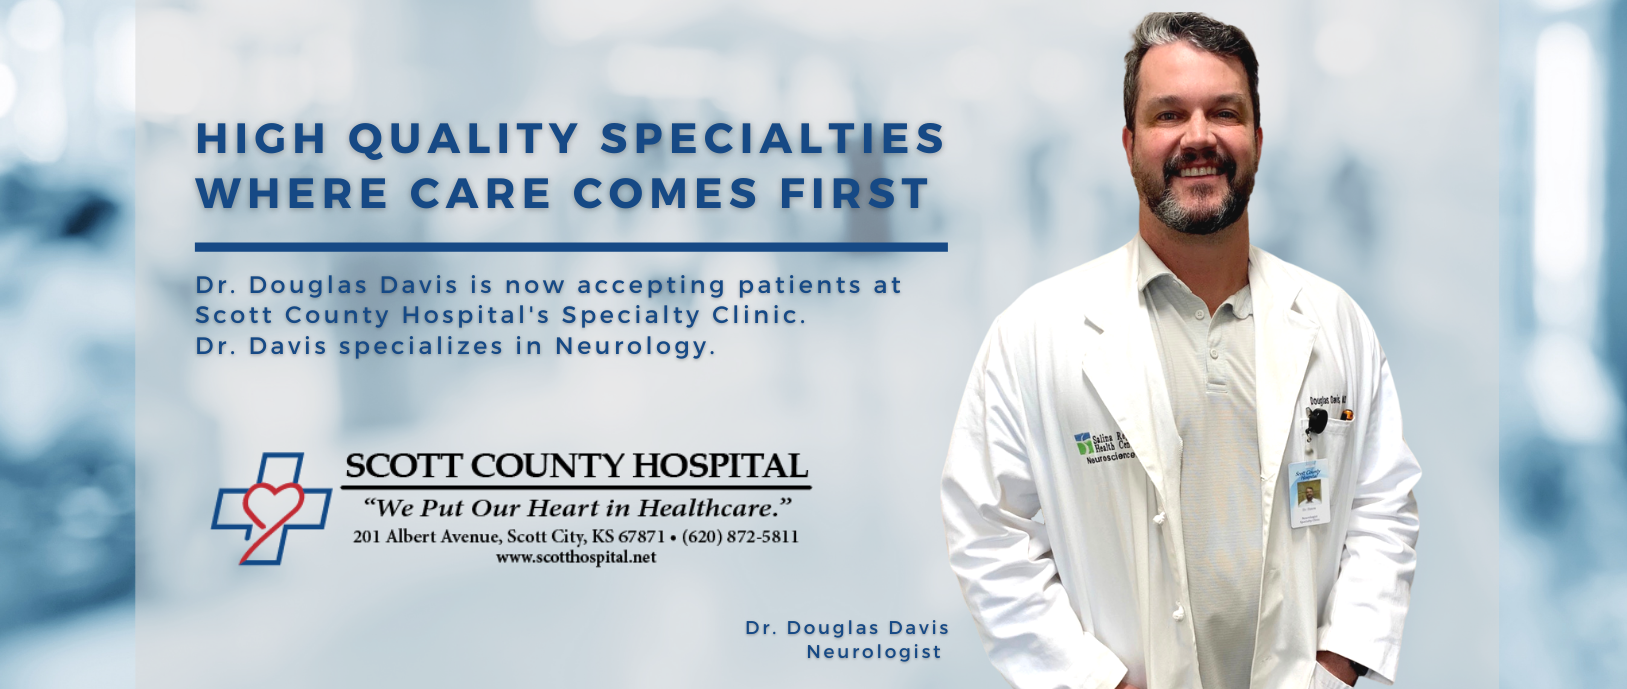 Dr. Douglas Davis is now accepting patients at Scott County Hospital Specialty Clinic. Dr. Davis specializes in Neurology.